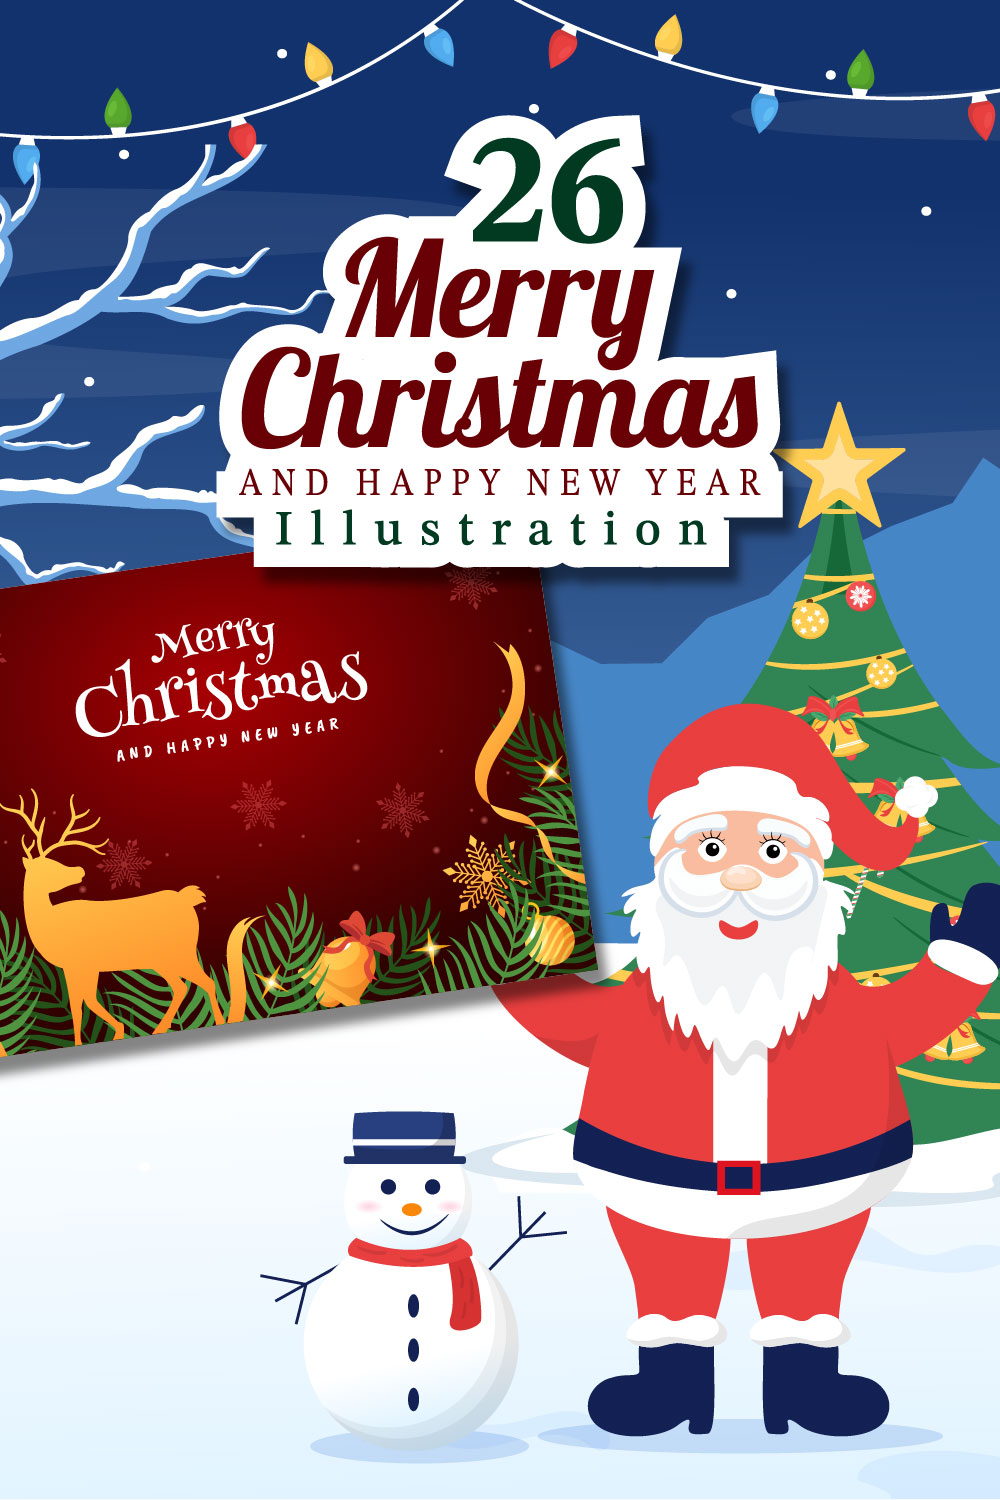 26 Merry Christmas and Happy New Year Illustration pinterest image.